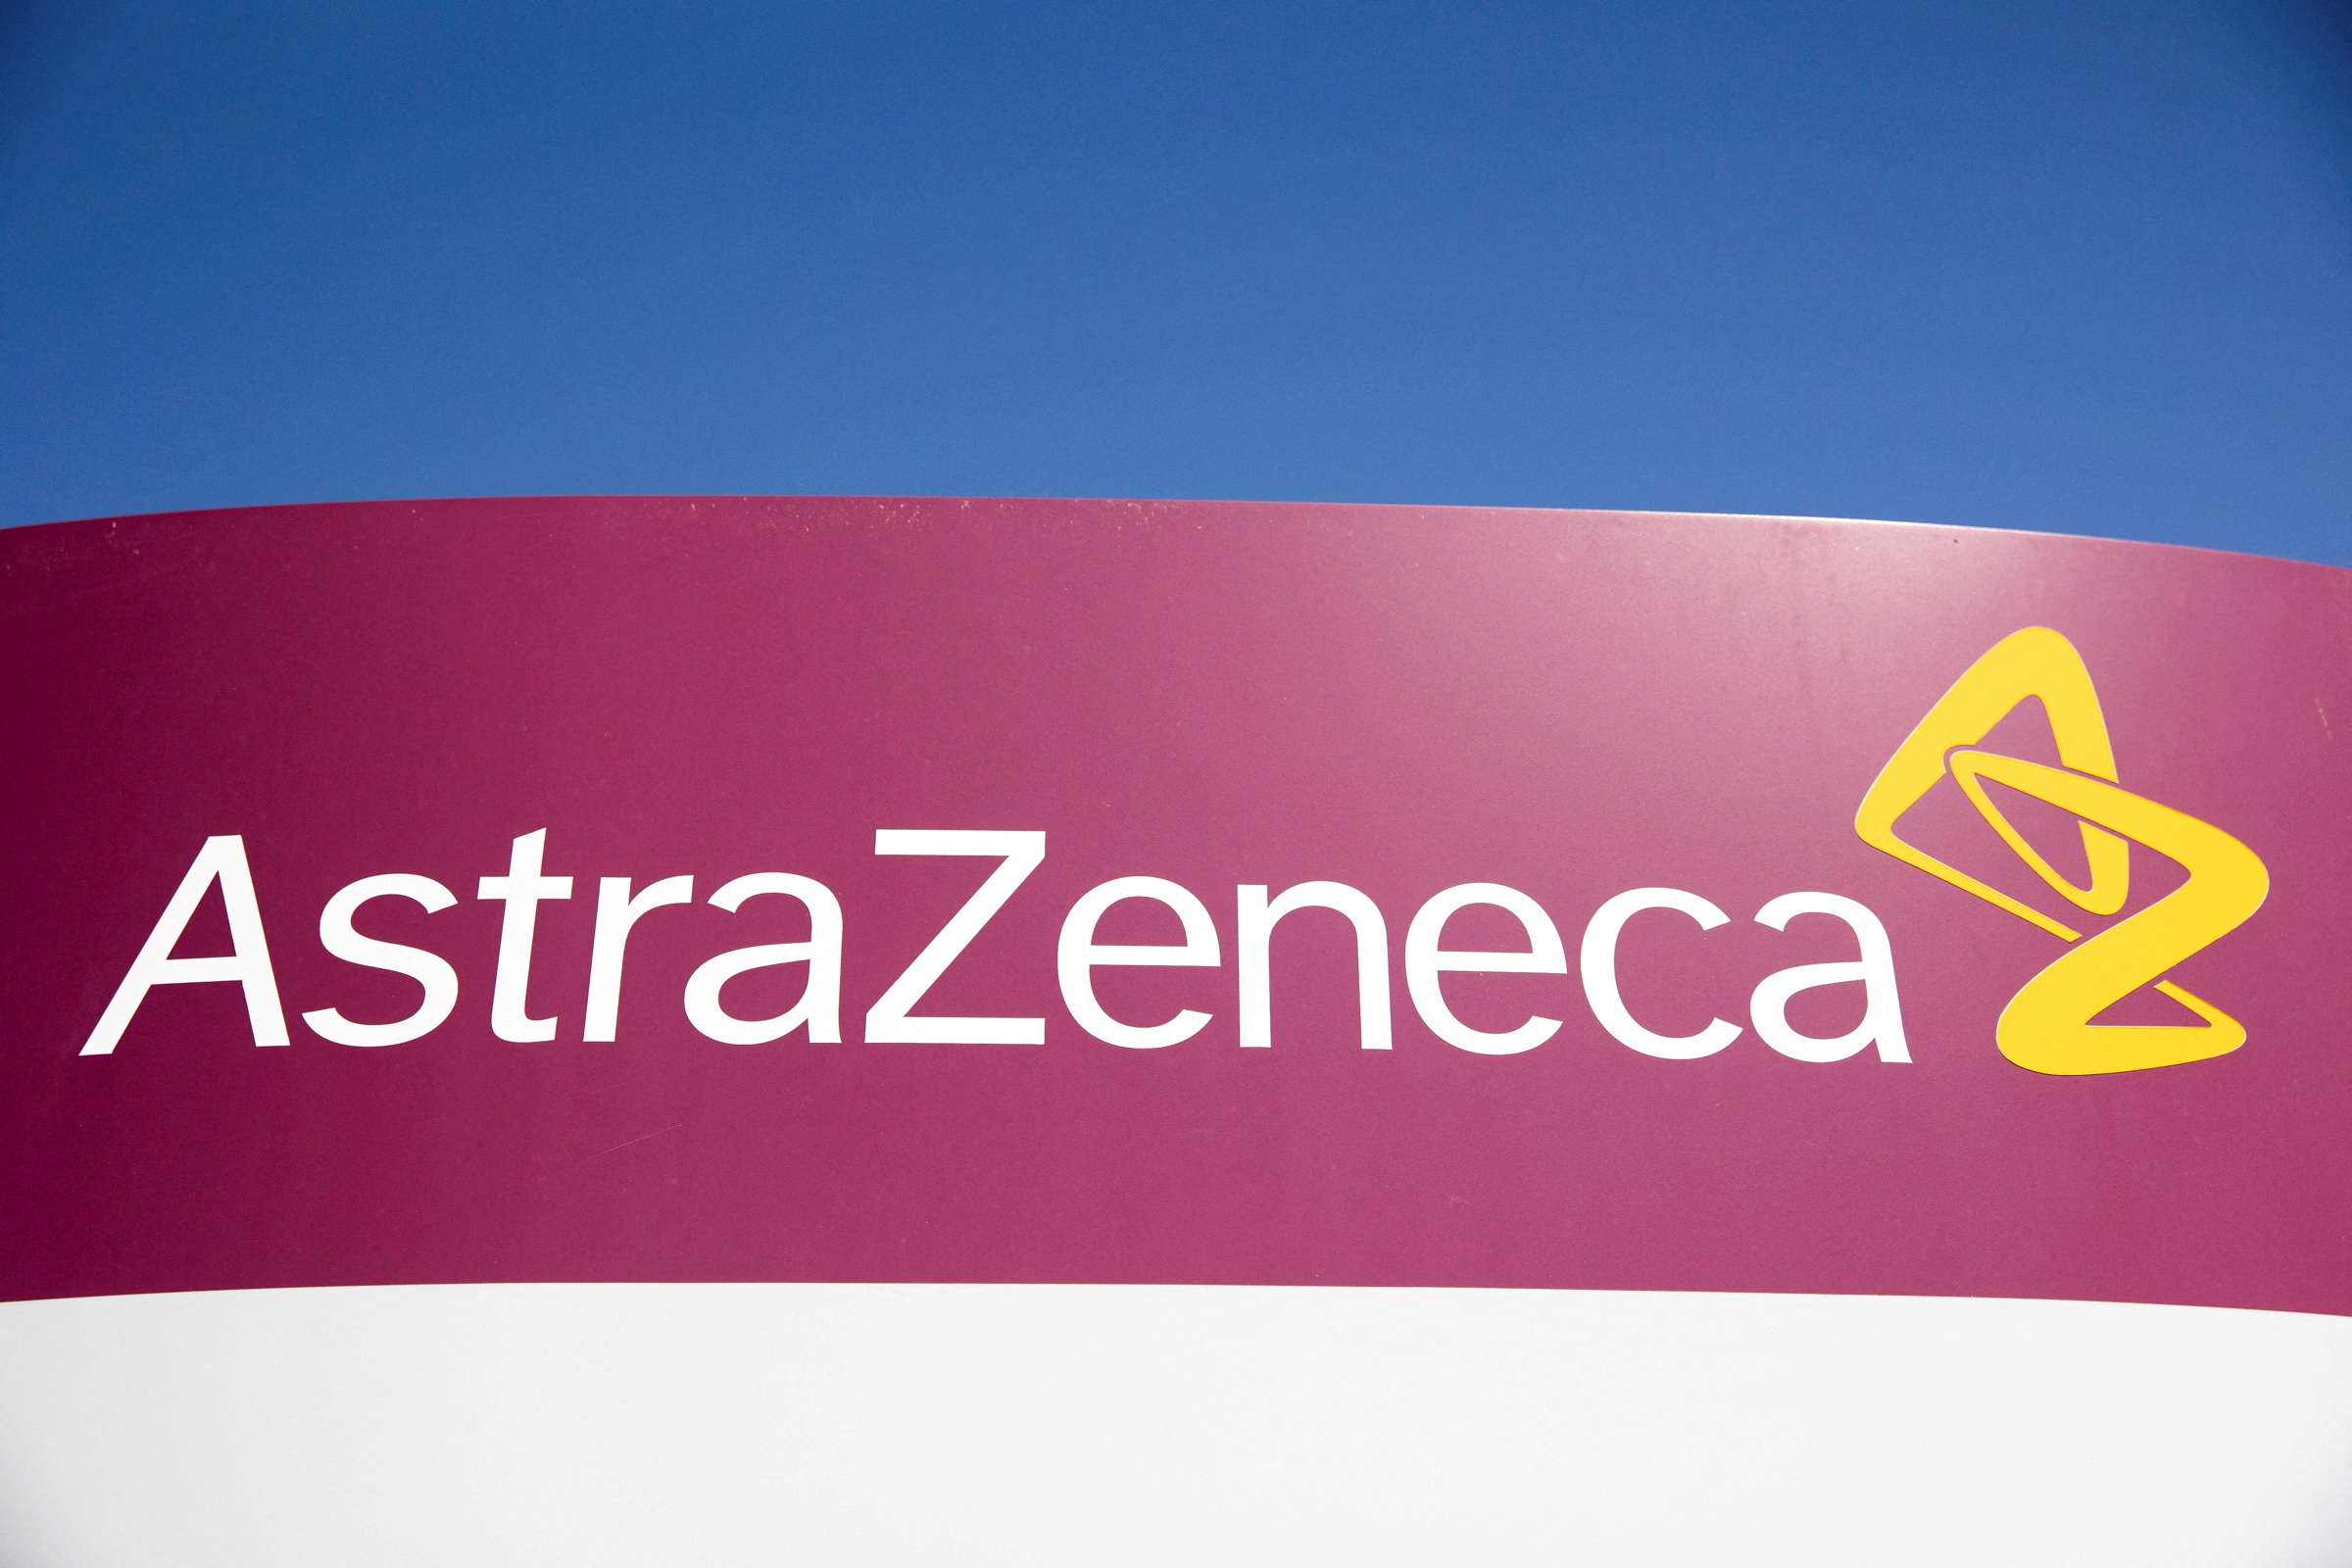 The logo for AstraZeneca is seen outside its North America headquarters in Wilmington